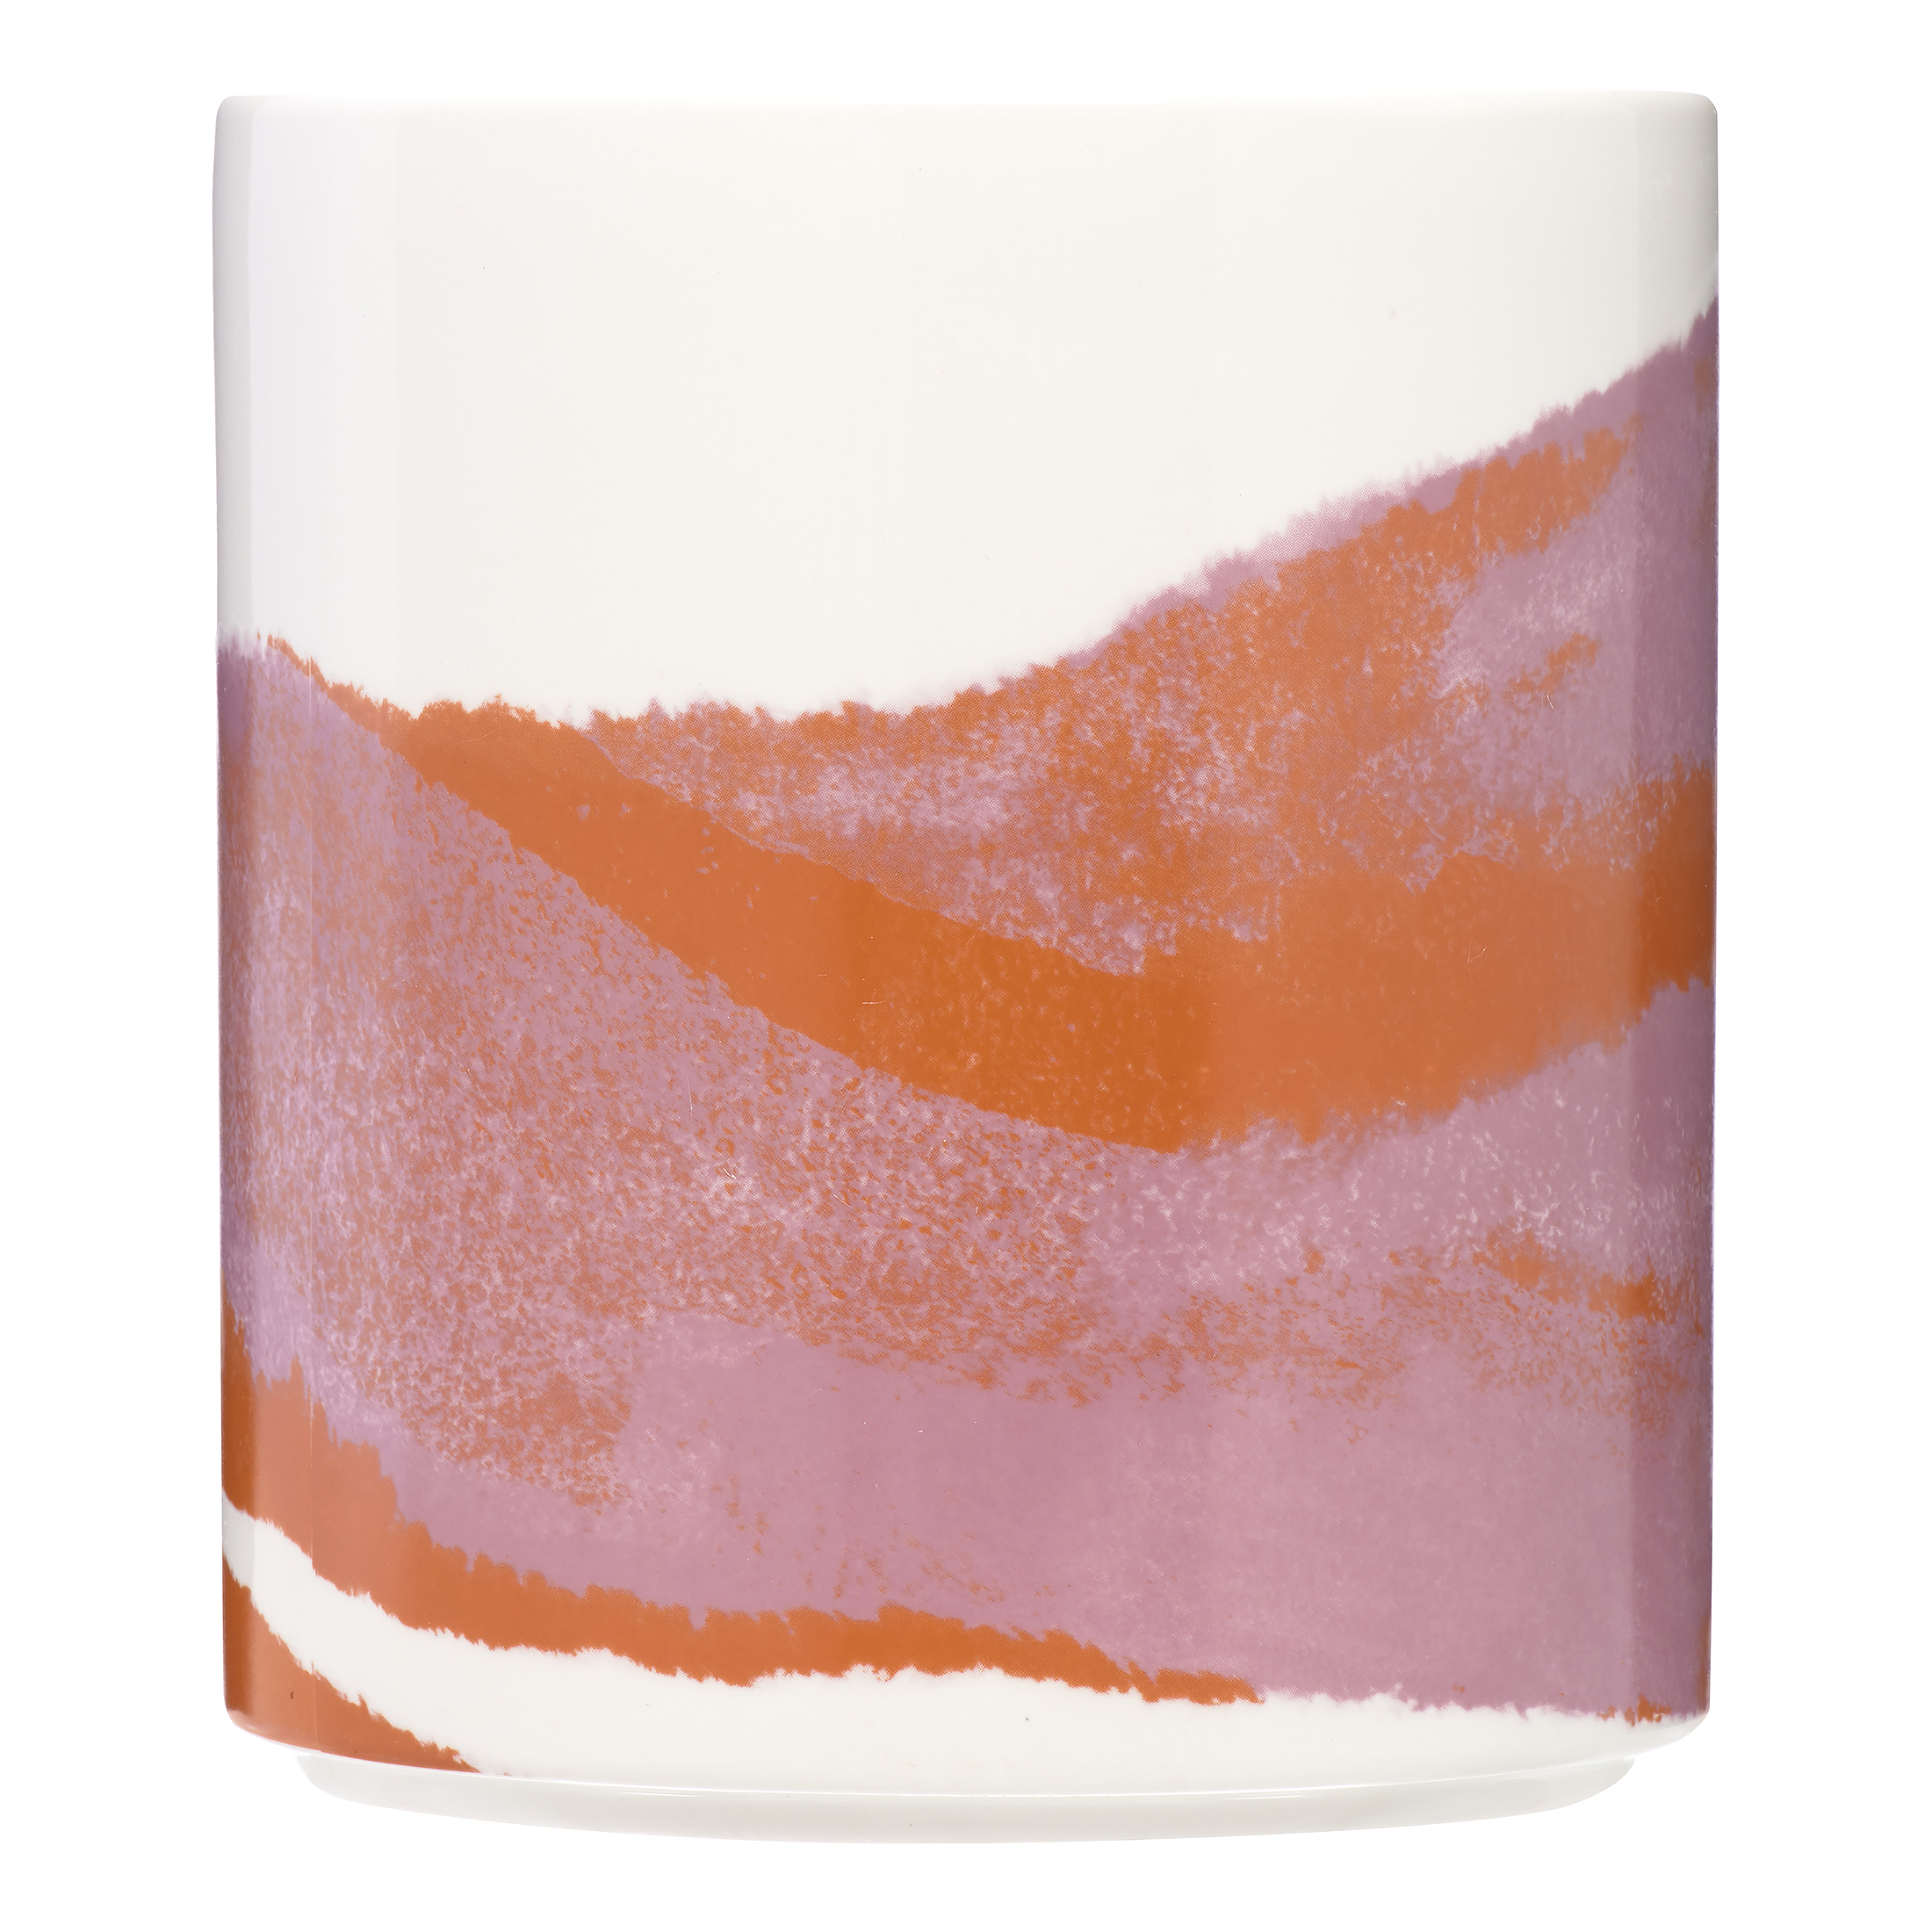 Abstract Marble Utensil Holder by Drew Barrymore Flower Home - image 2 of 8